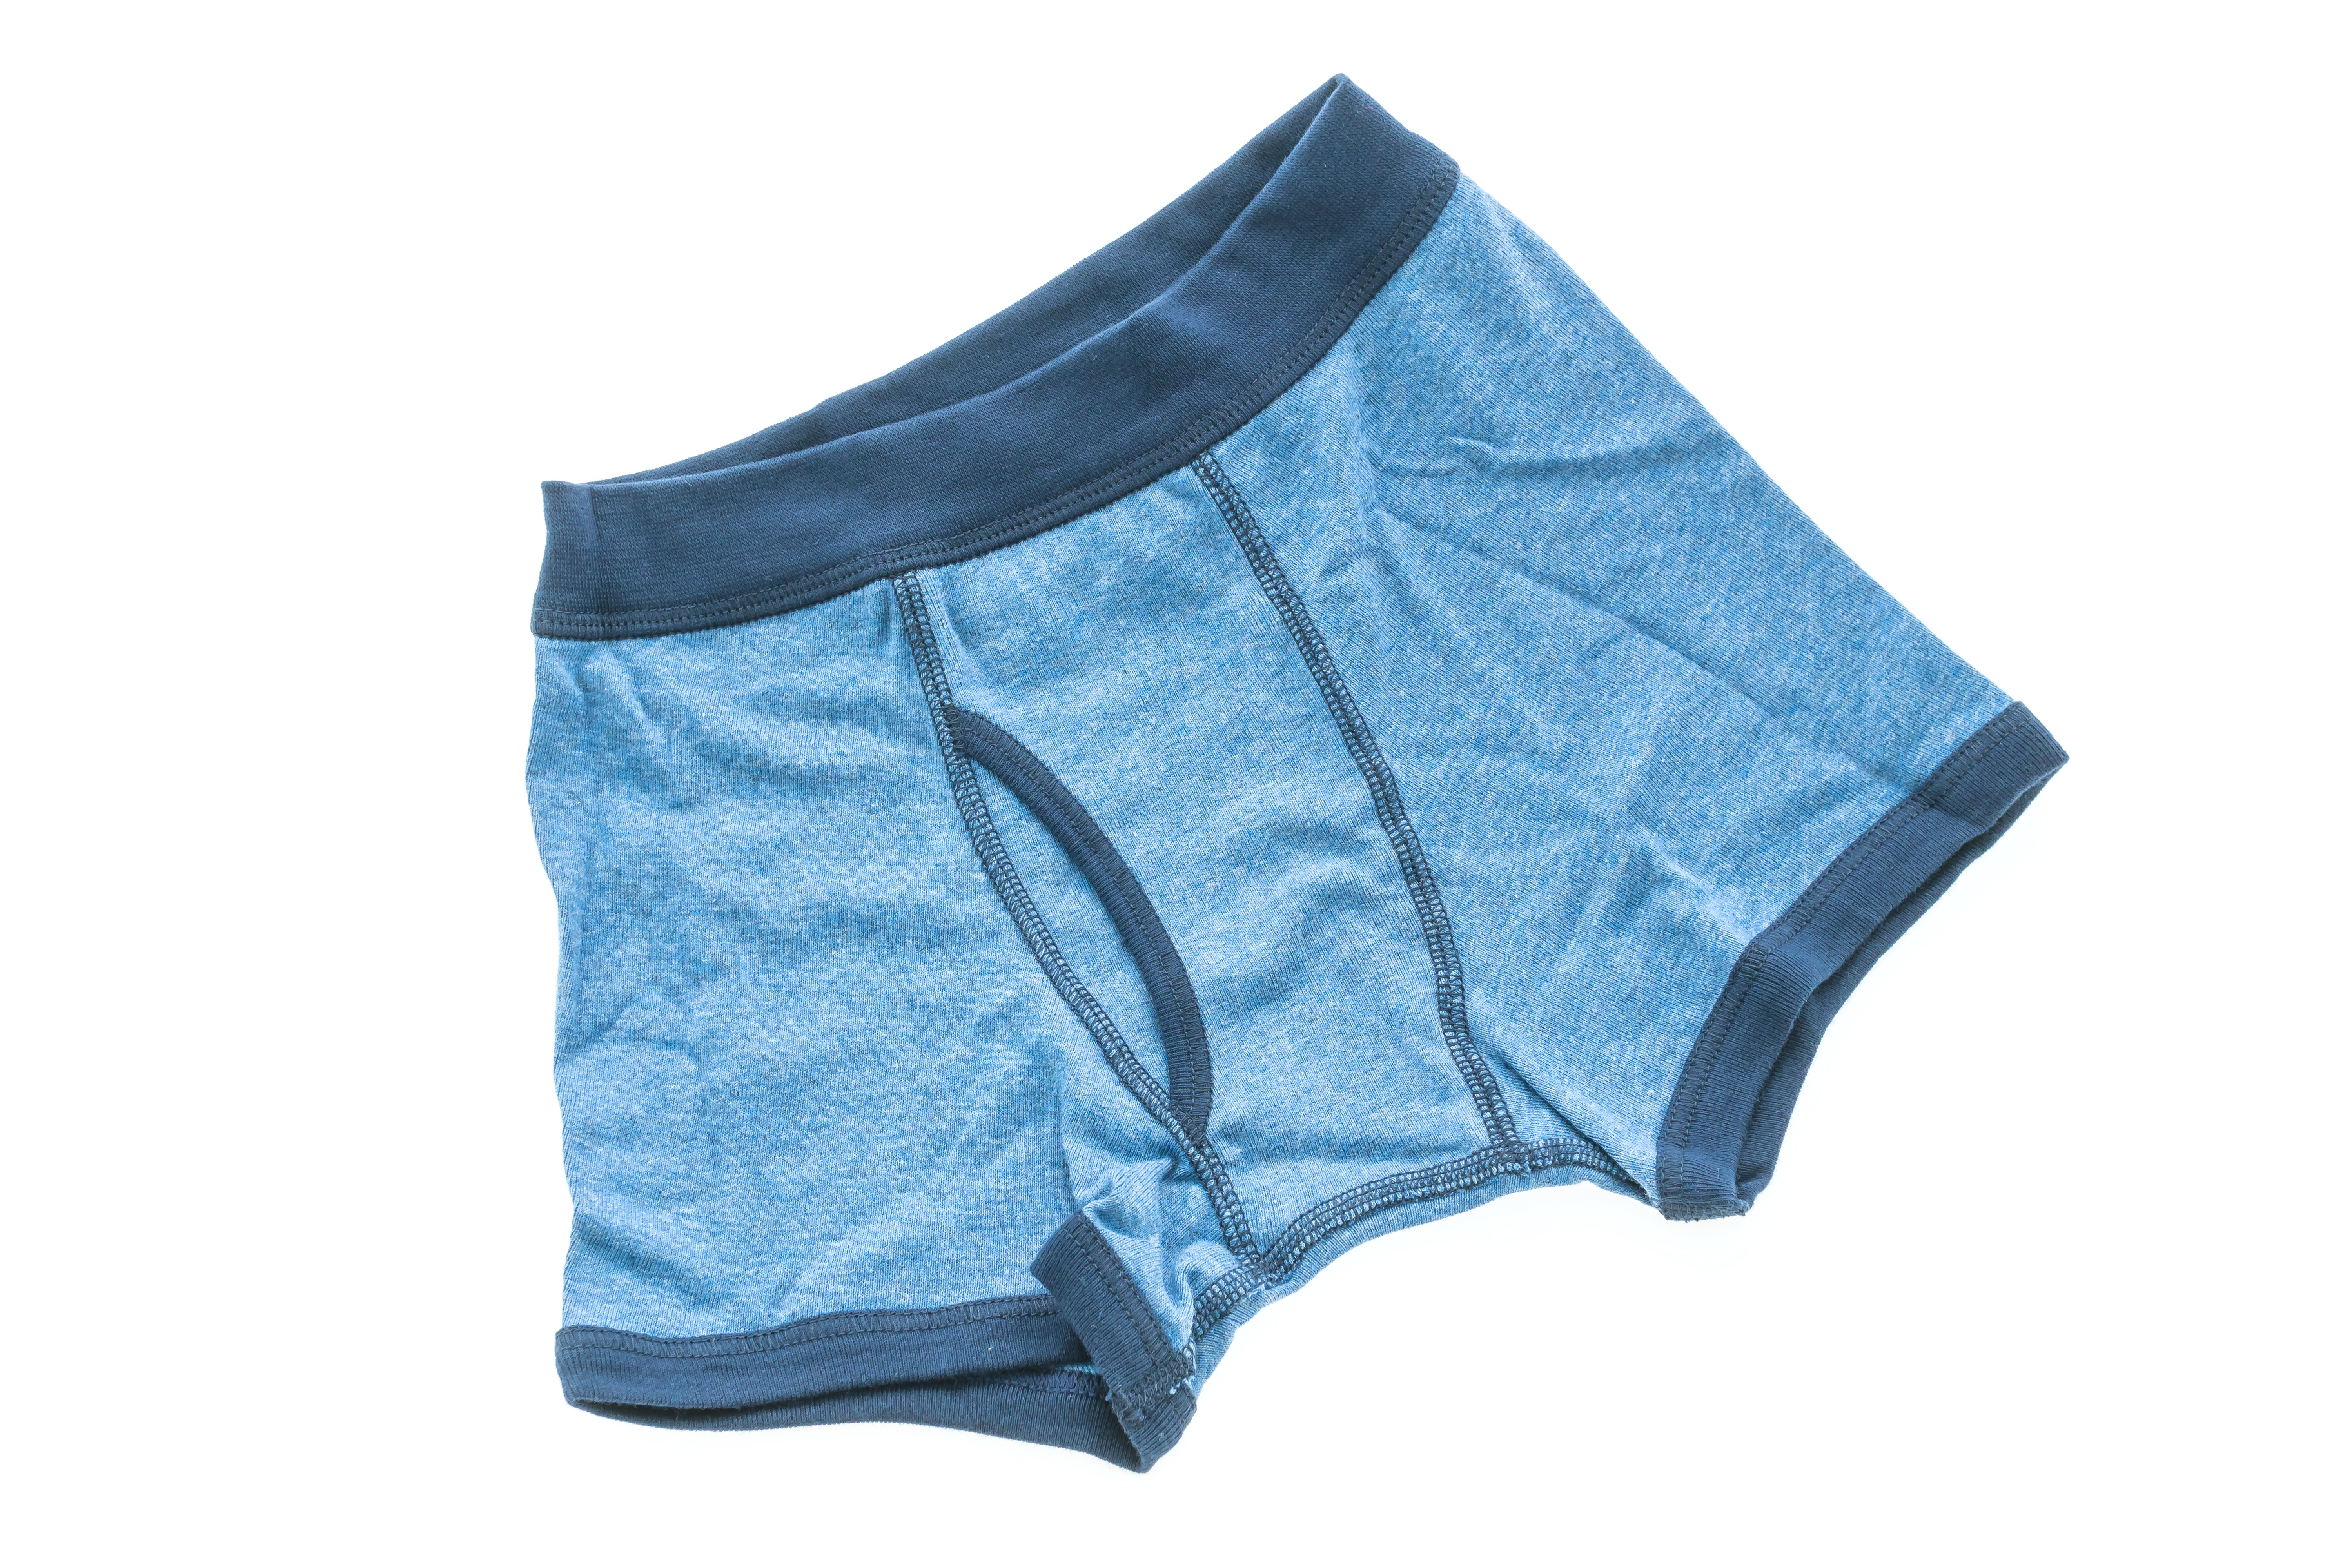 Underwear Brand Reveals Real Reason Men's Boxers Have Hole In The Front